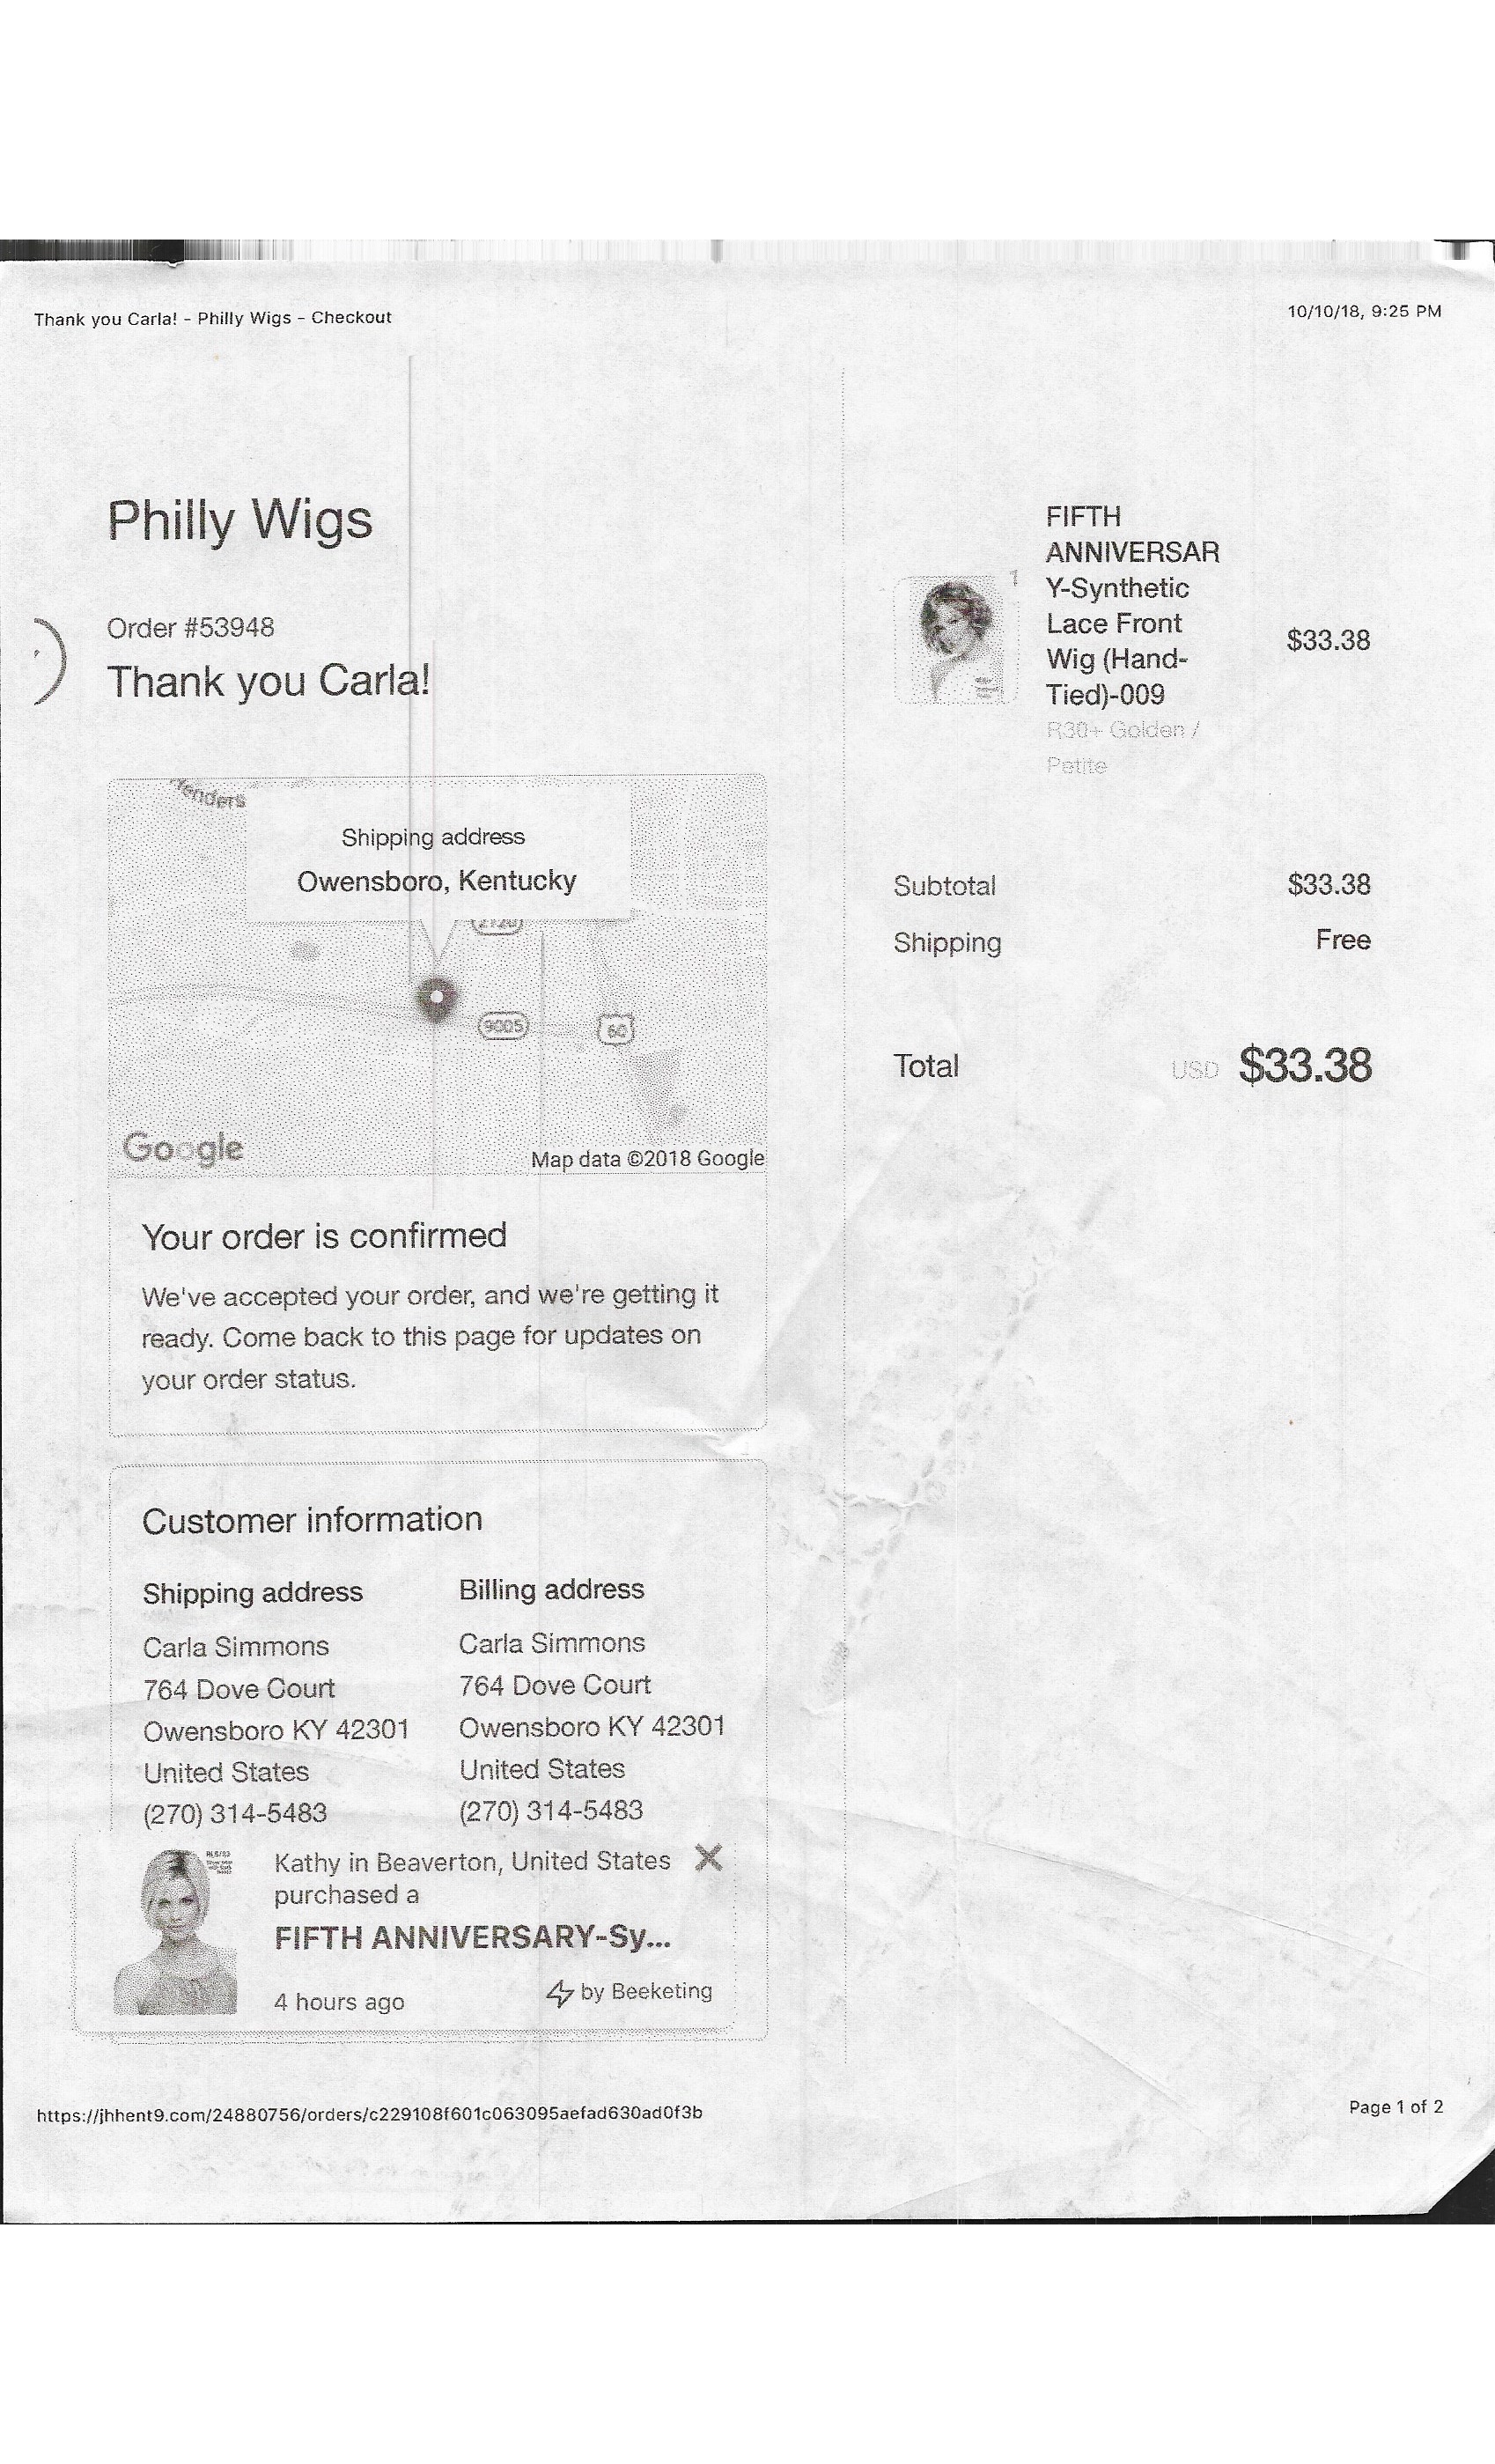 Receipt for Philly Wigs